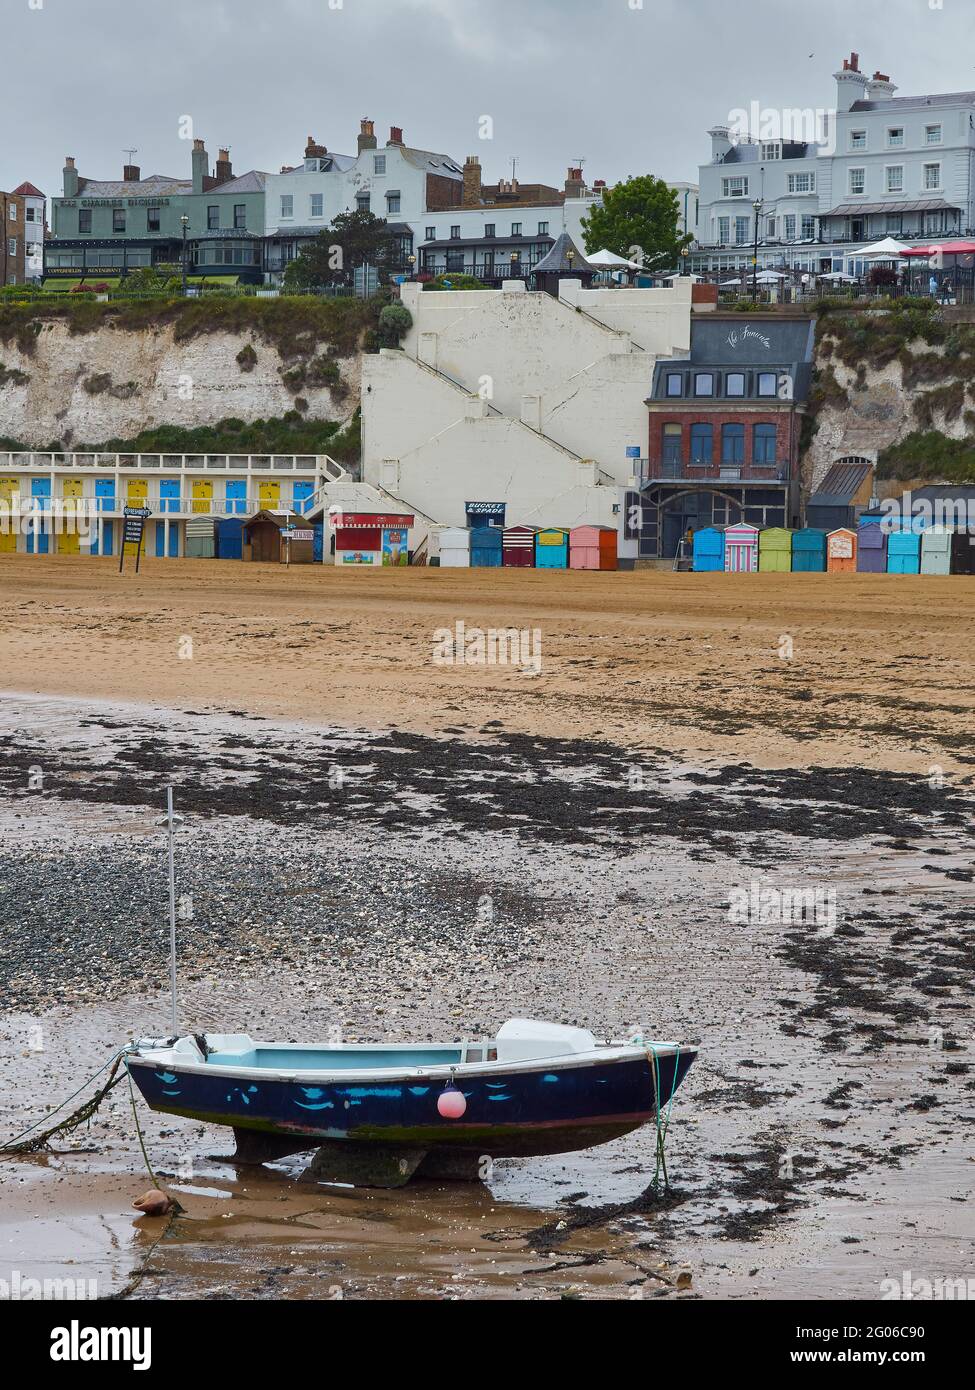 The beach huts and buildings of a cliff-top seaside town. A small boat lies on the sand and a leaden sky hangs overhead. Stock Photo